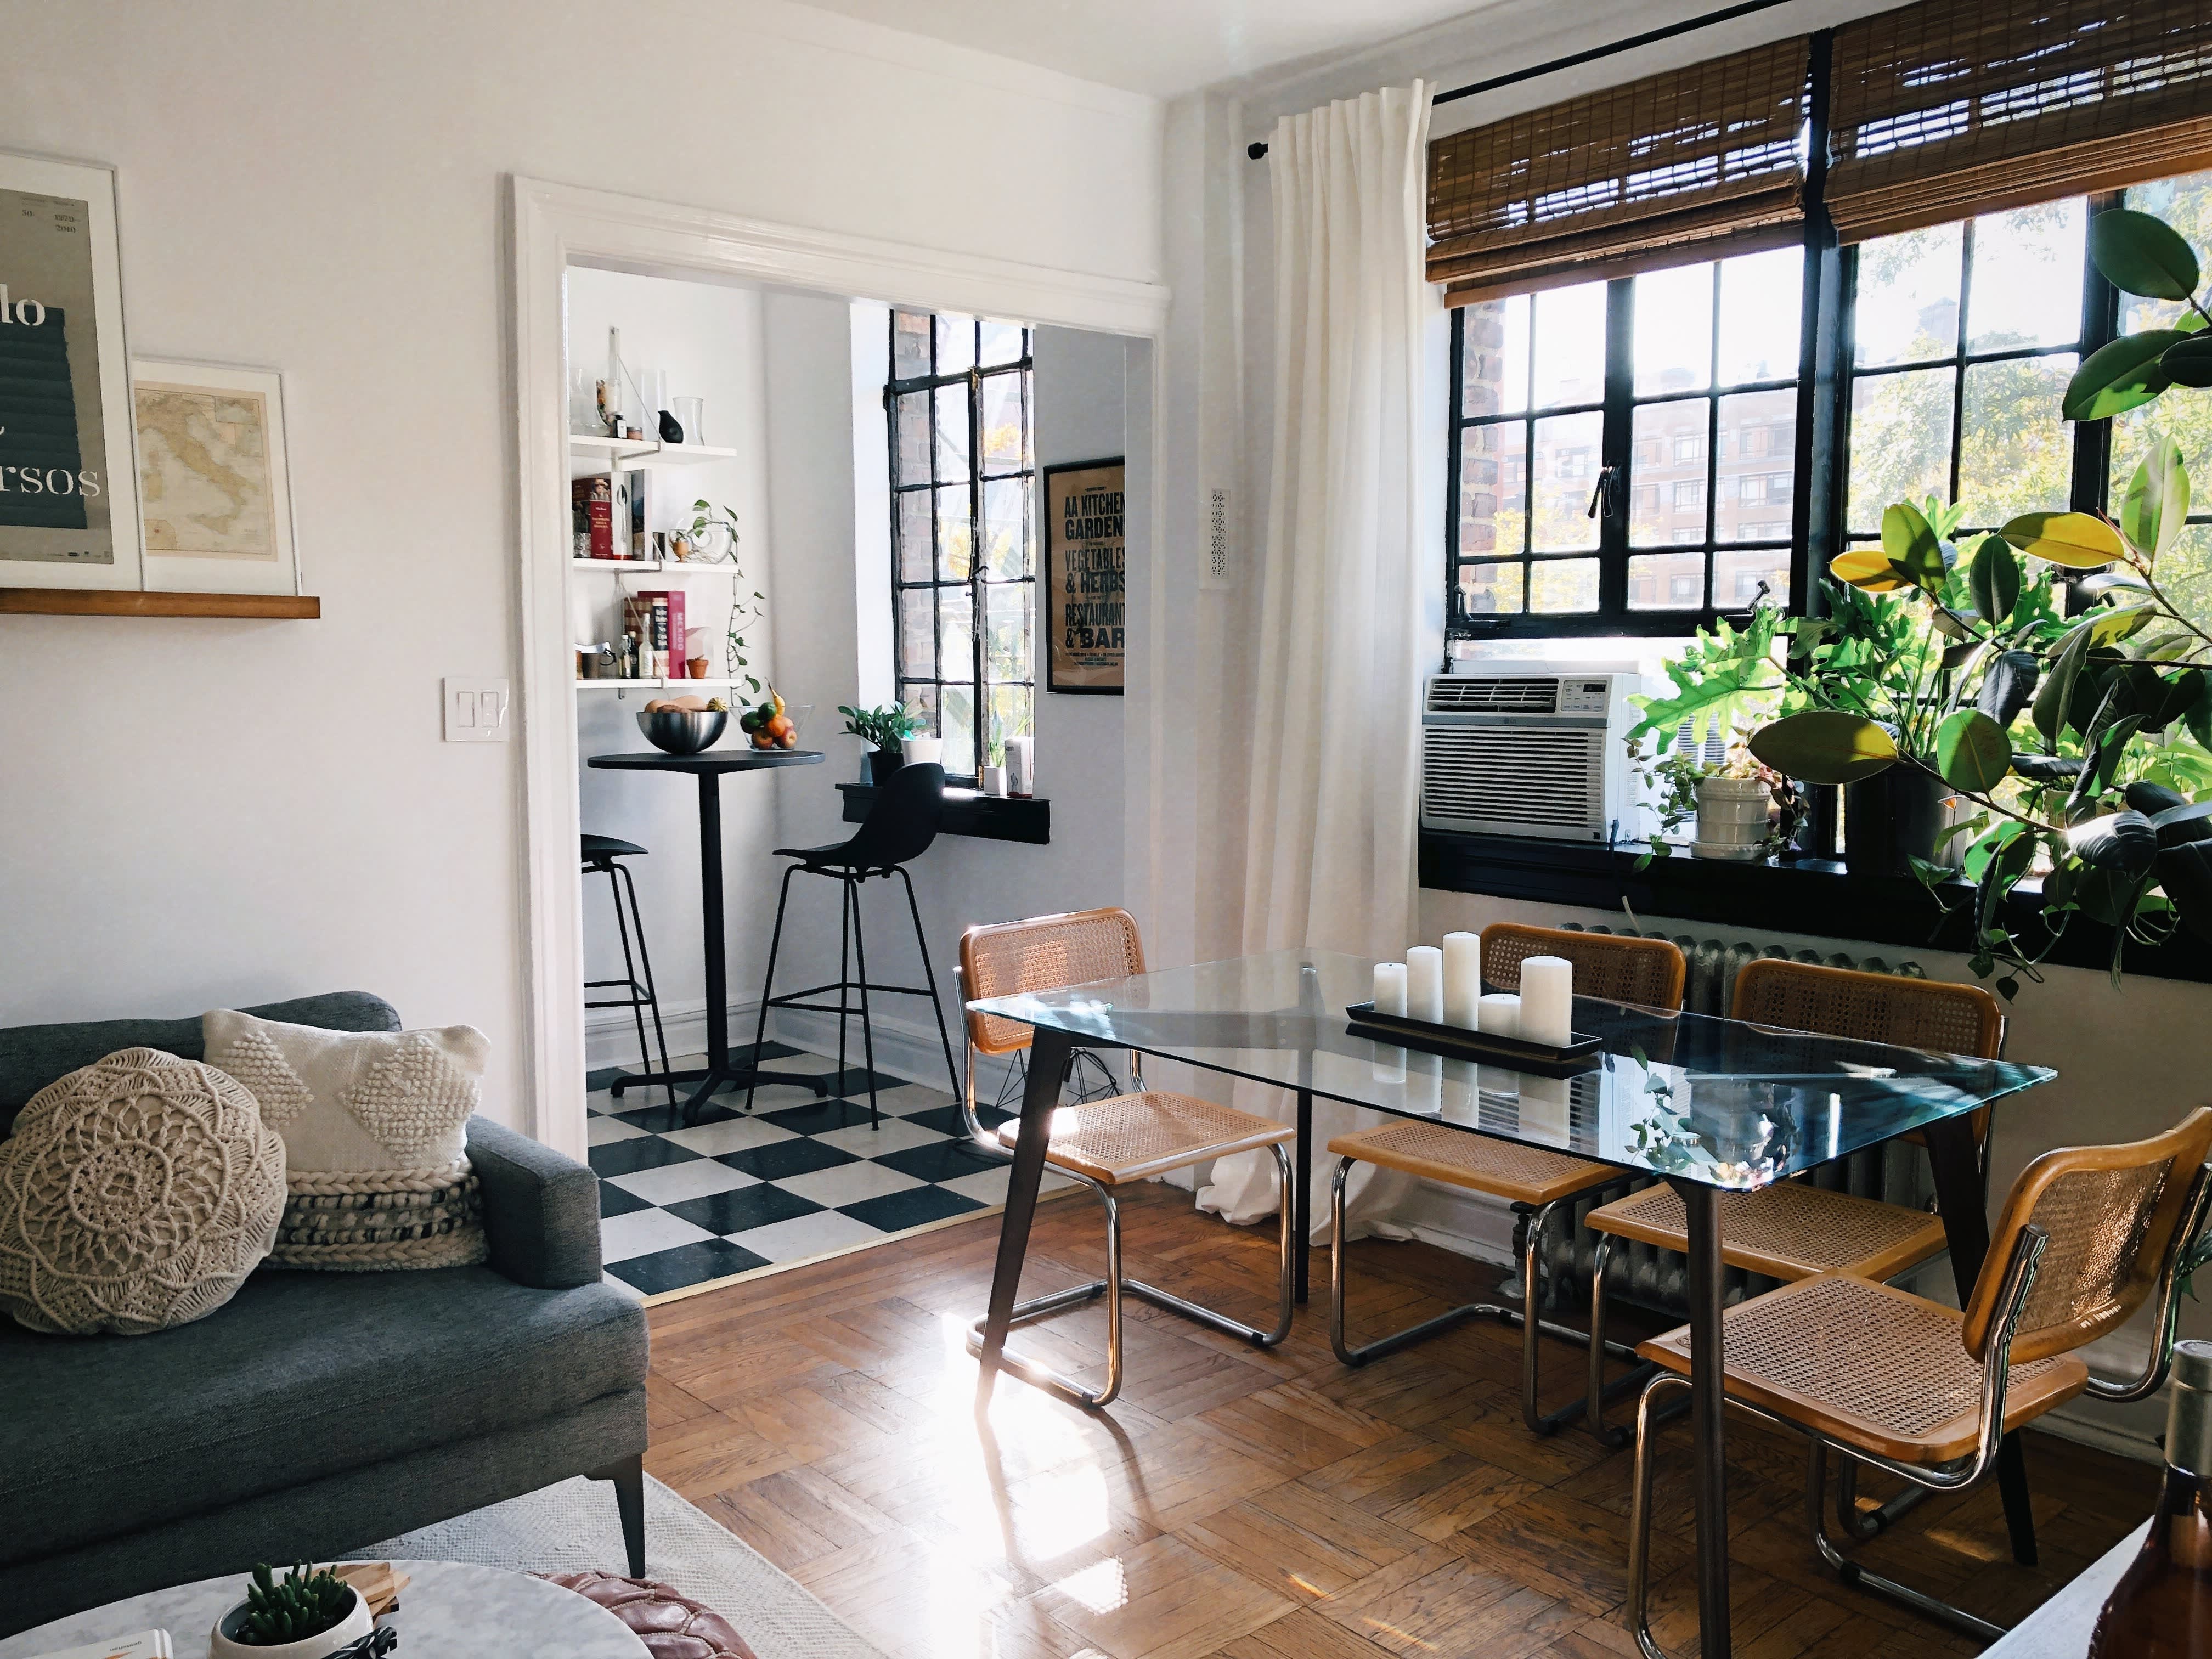 630-Square-Foot West Village Rental Apartment | Apartment Therapy